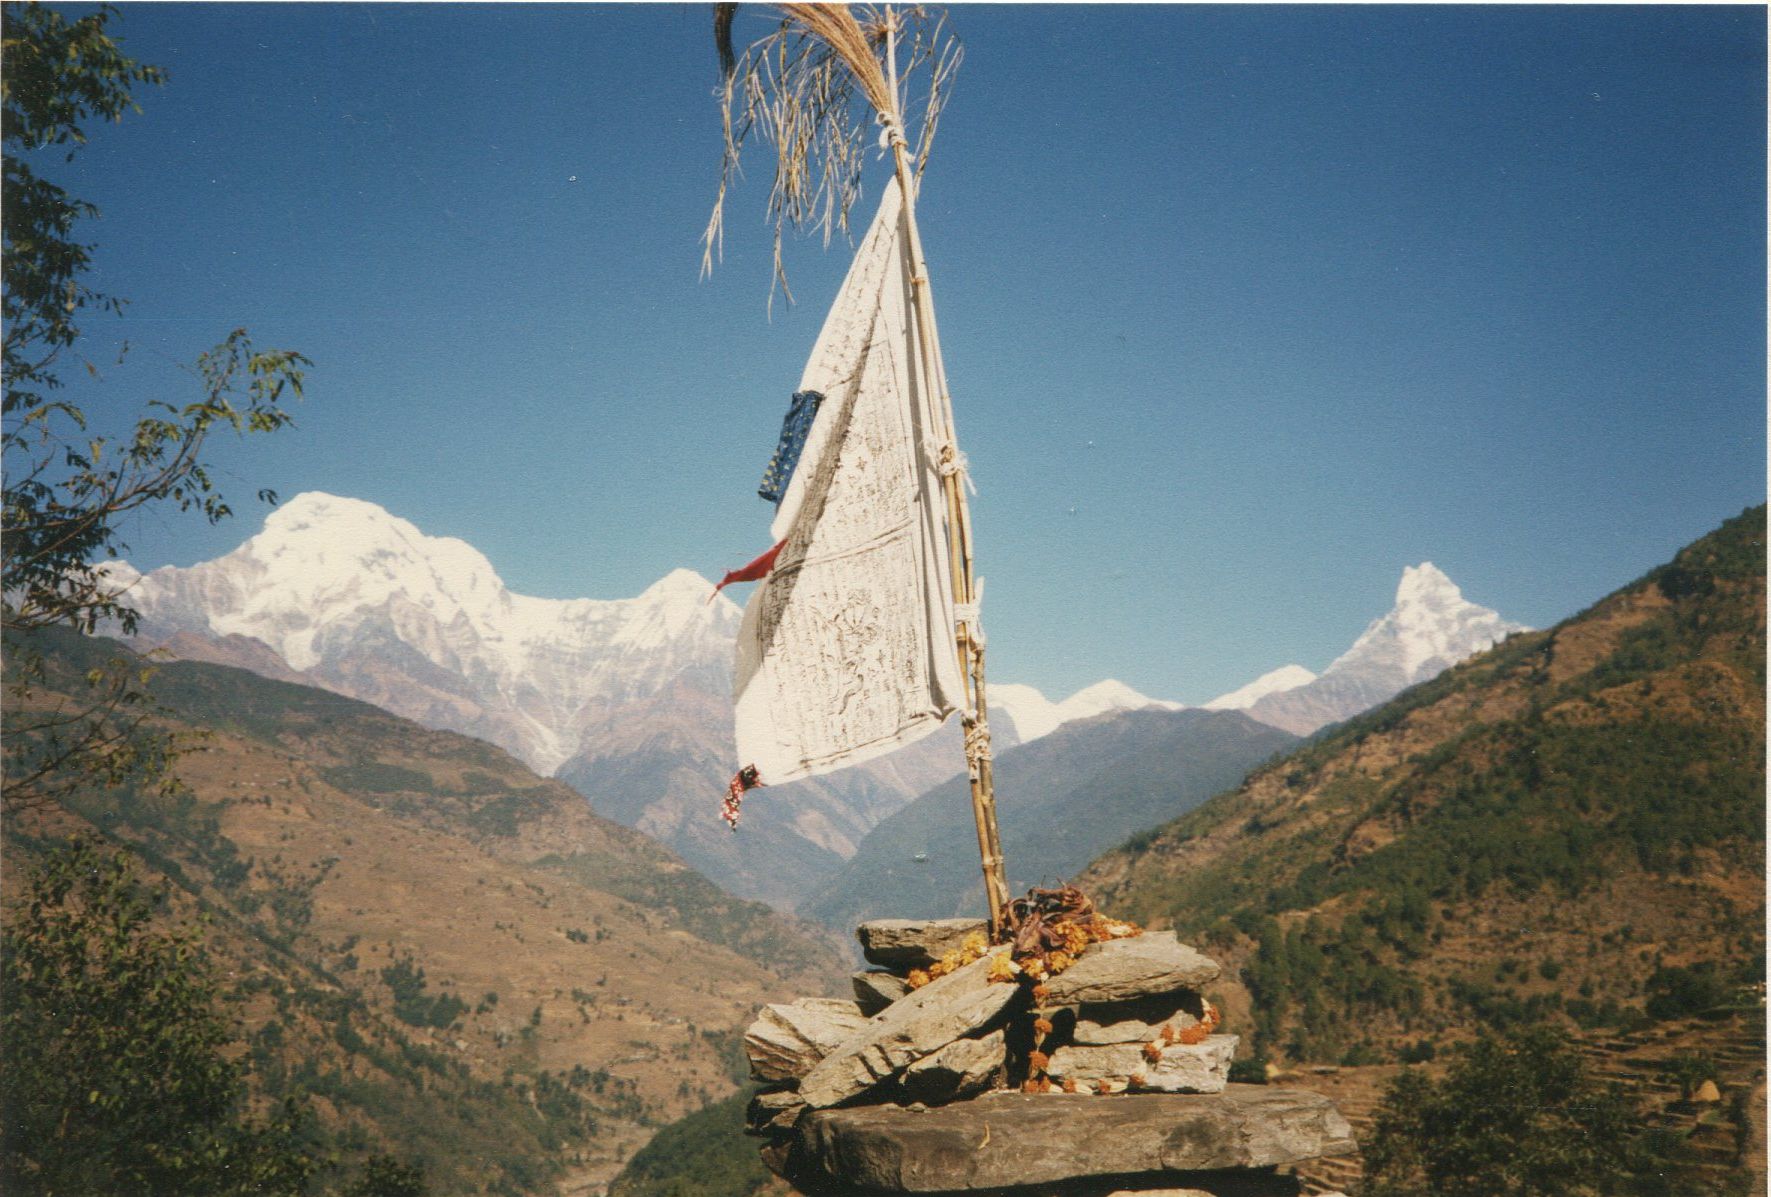 Annapurna South Peak ( 7219m ) , Hiunchuli ( 6441m ) and Macchapucchre on route to Chomrong